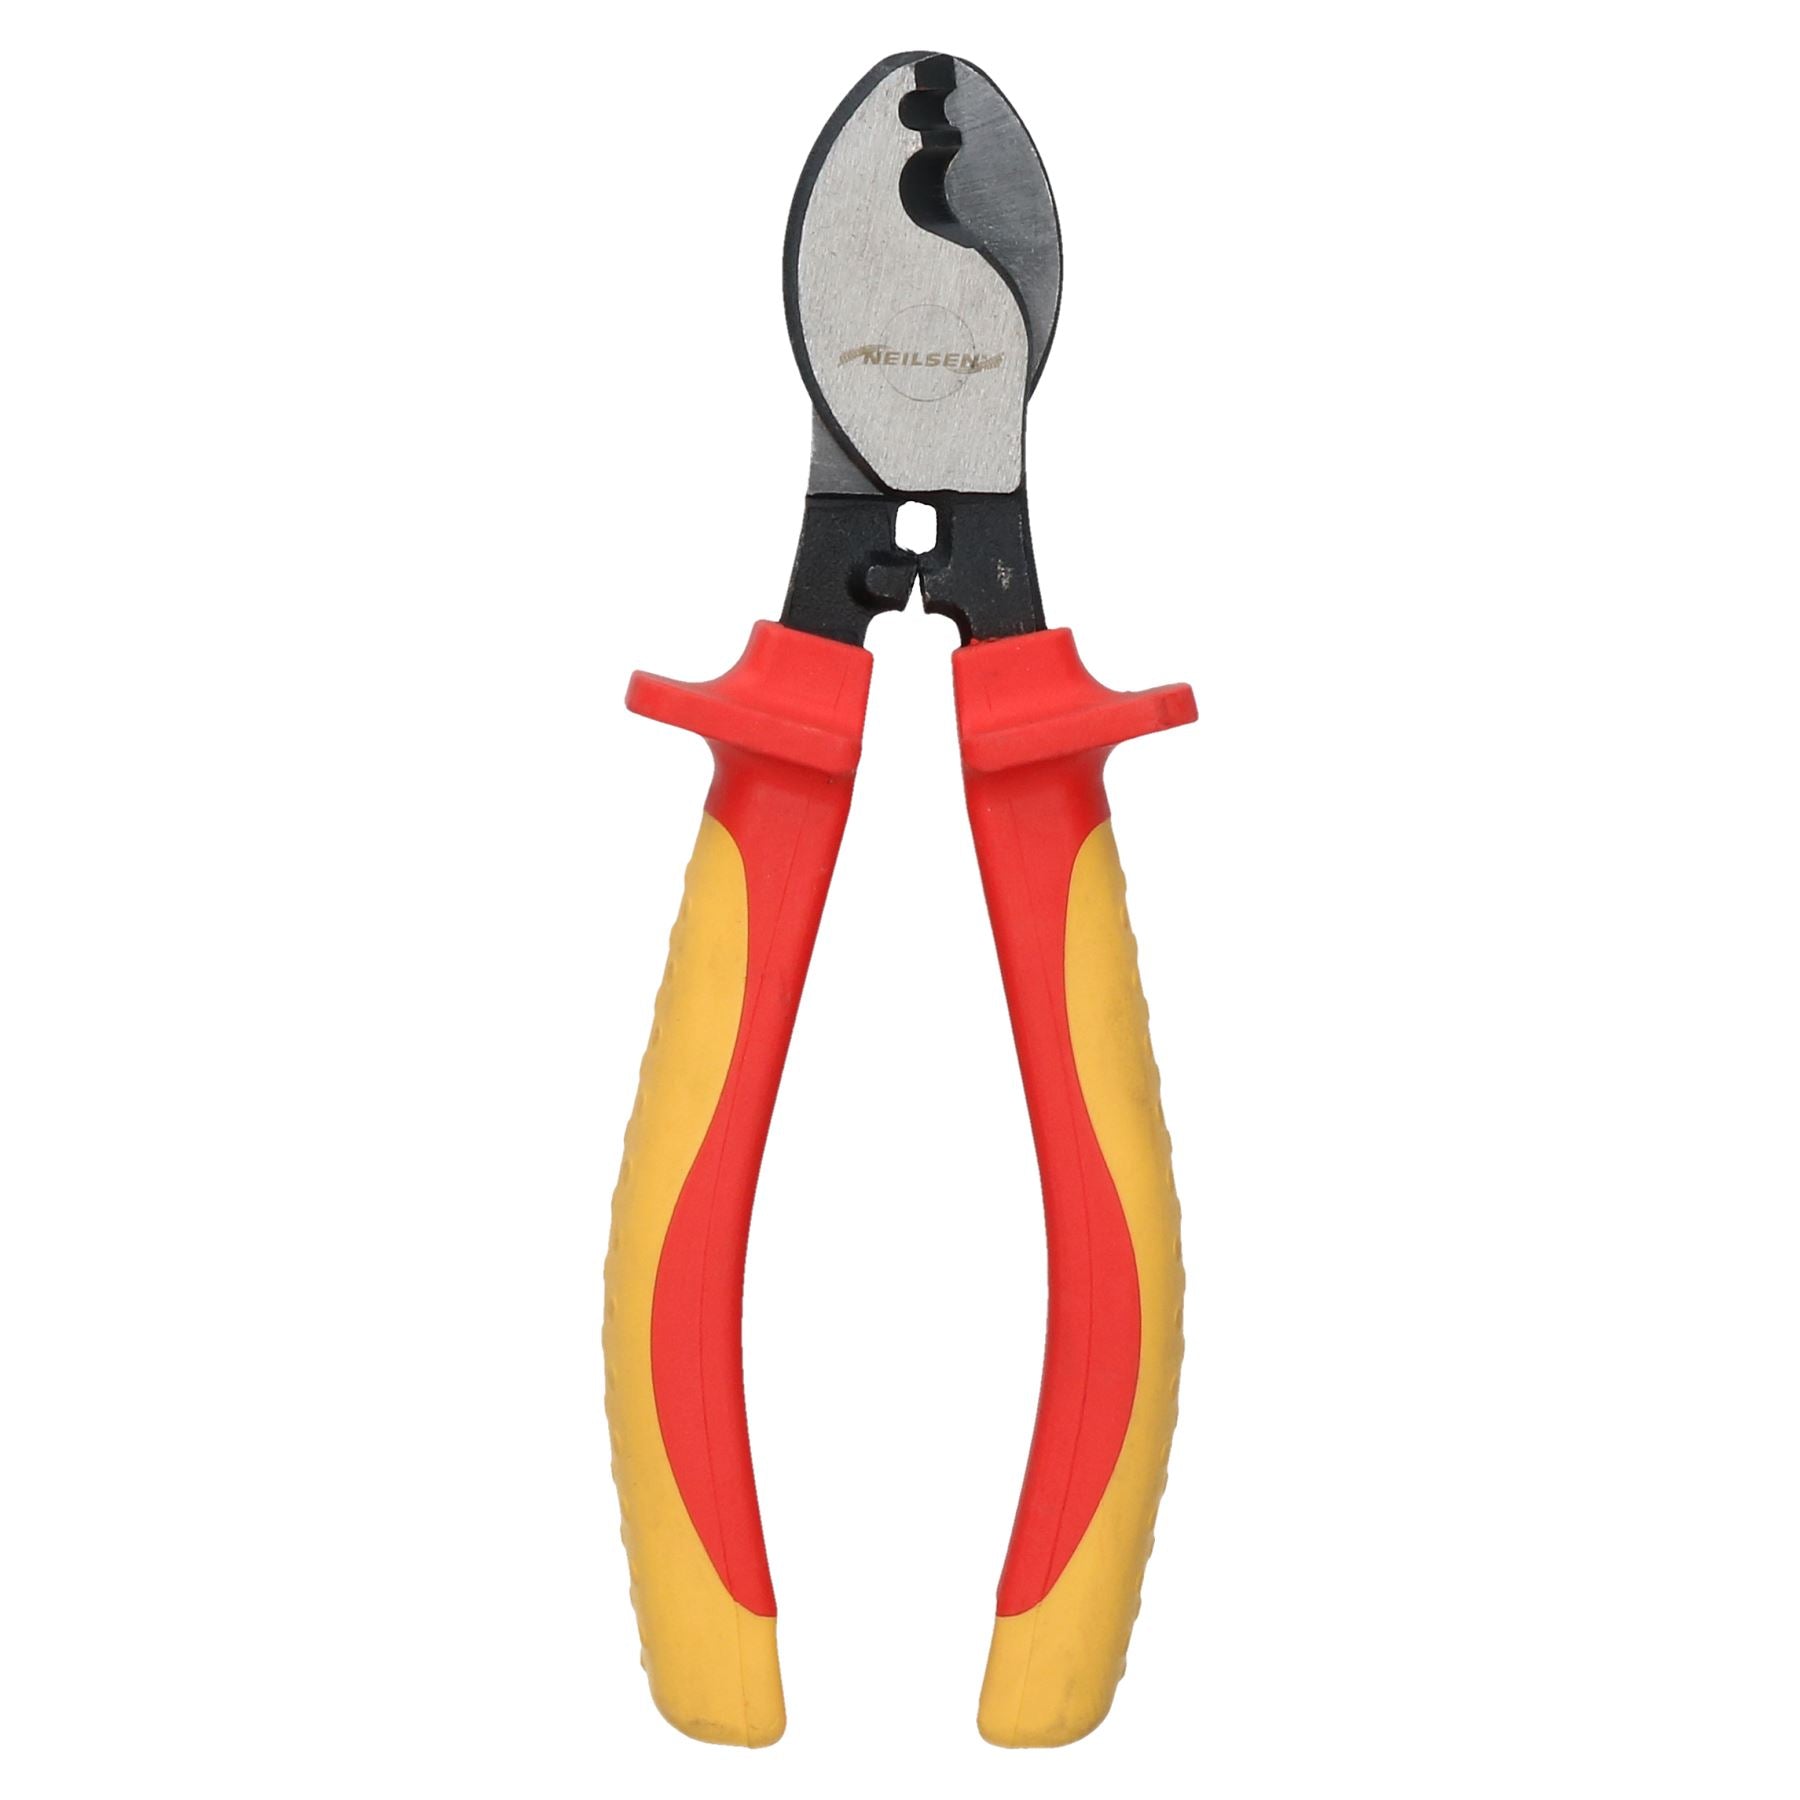 6" / 150mm VDE Insulated Electricians Electrical Cable Cutter Cutting Cut Pliers